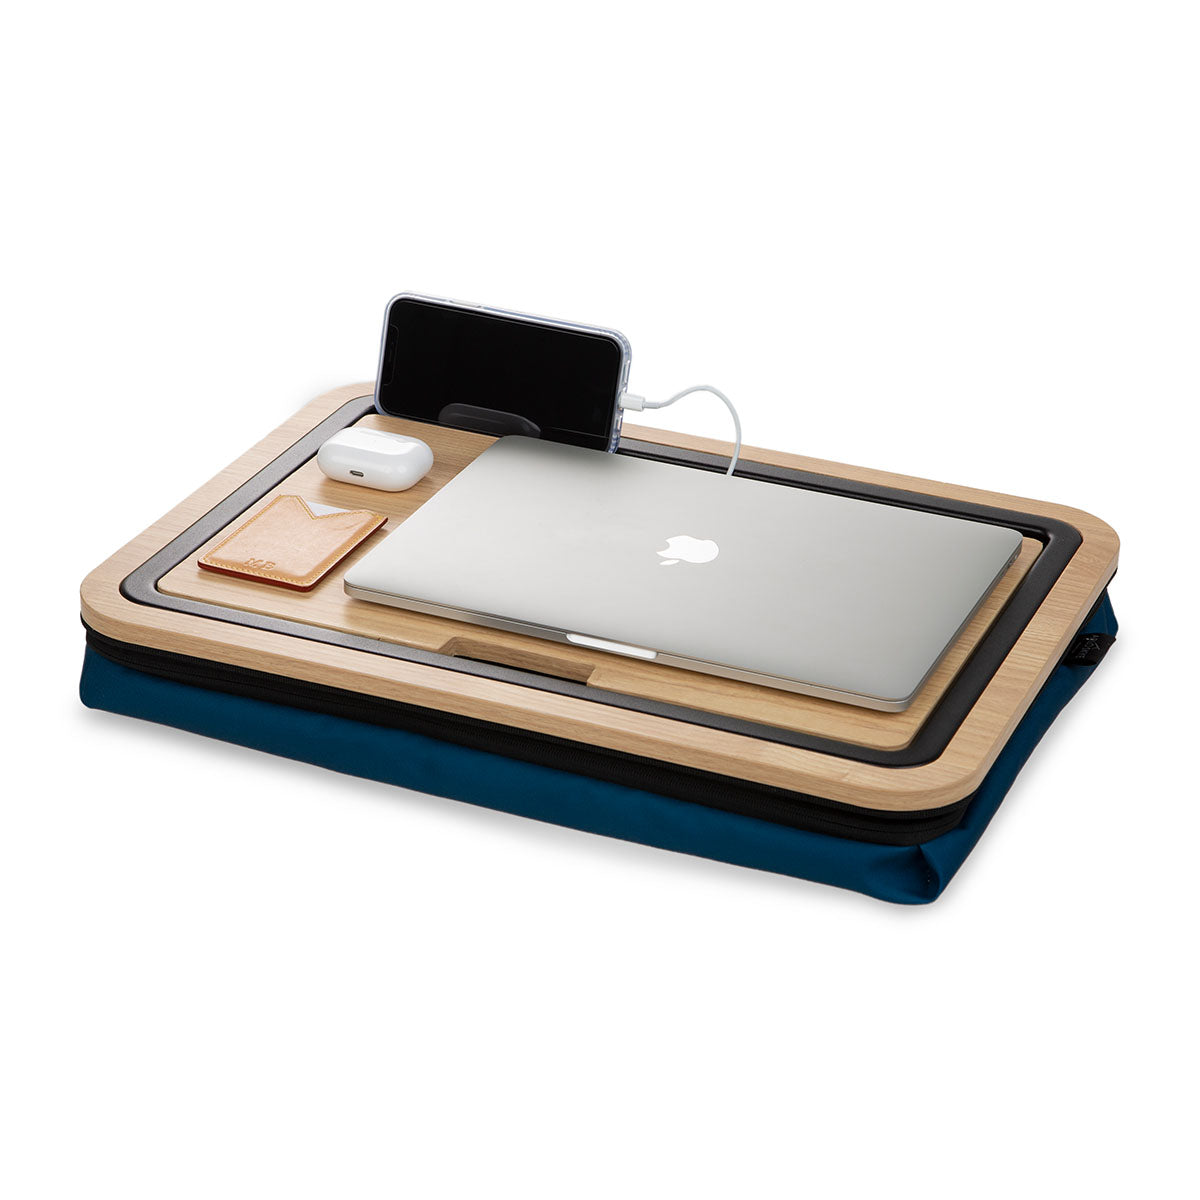 Front view of Lap Desk with cushion in cactus color laptop, card holder, airpods, and phone on surface.